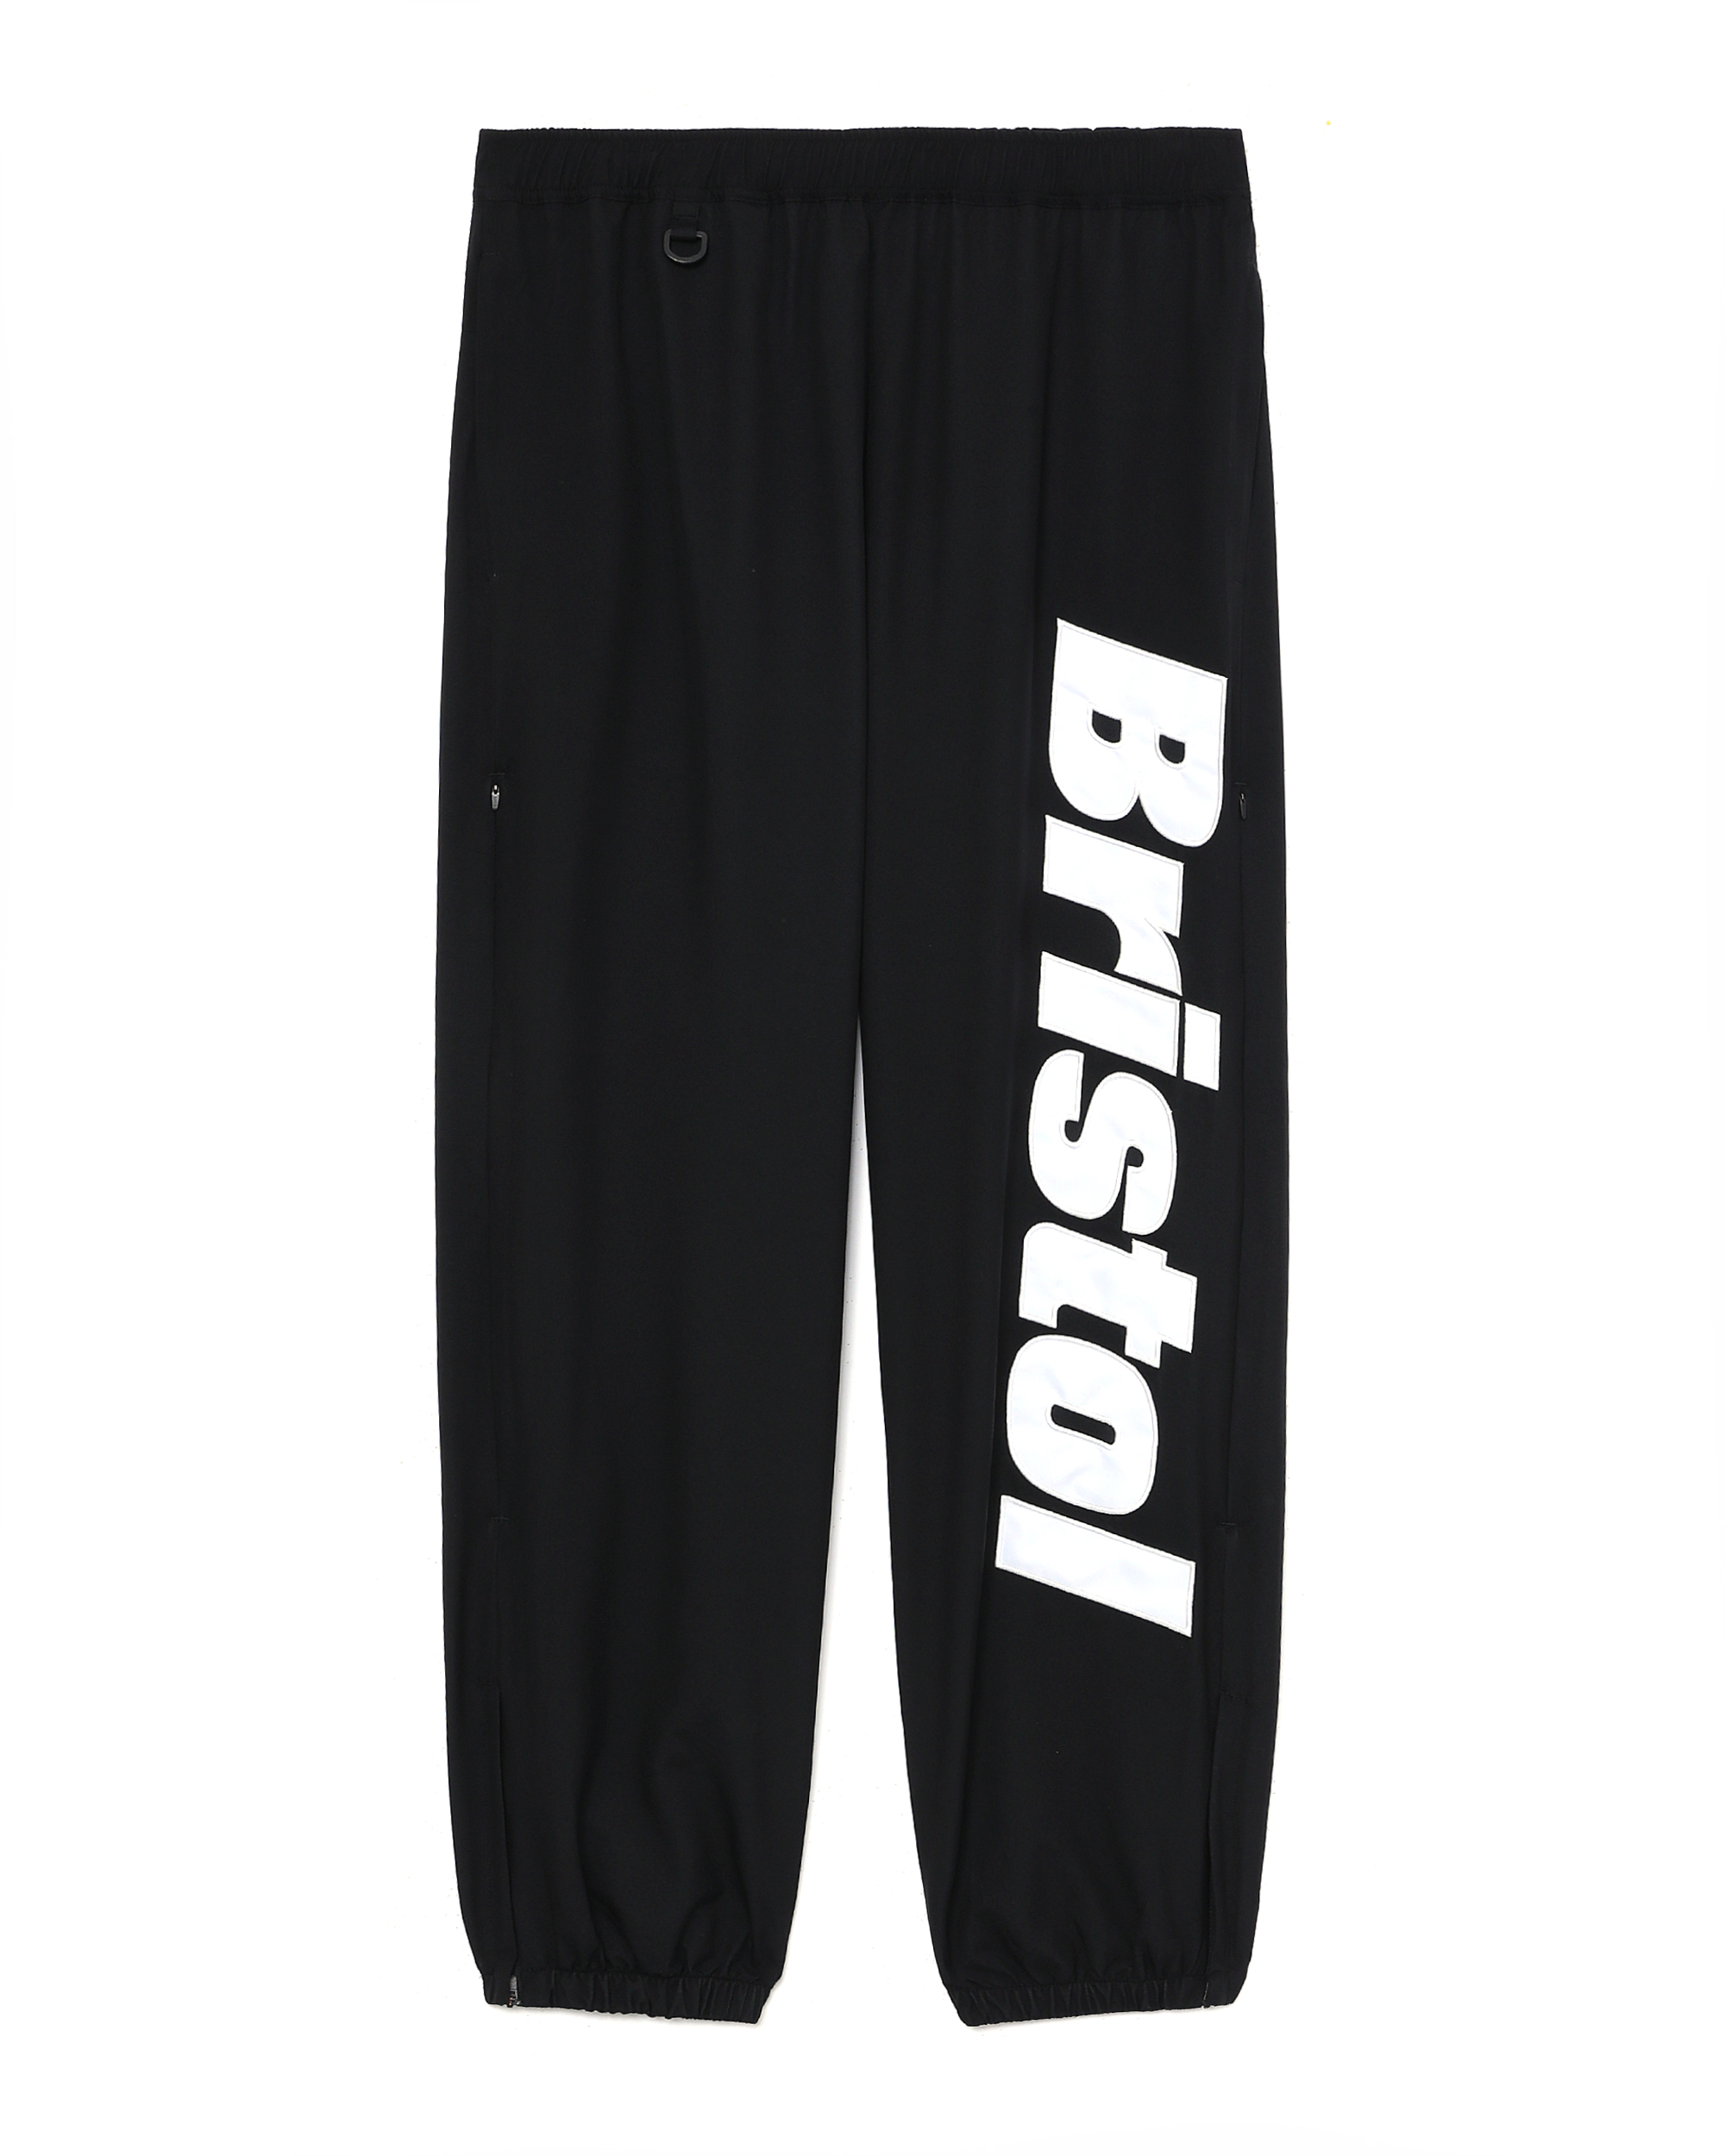 23ss fcrb VENTILATION LOGO EASY PANTS - その他